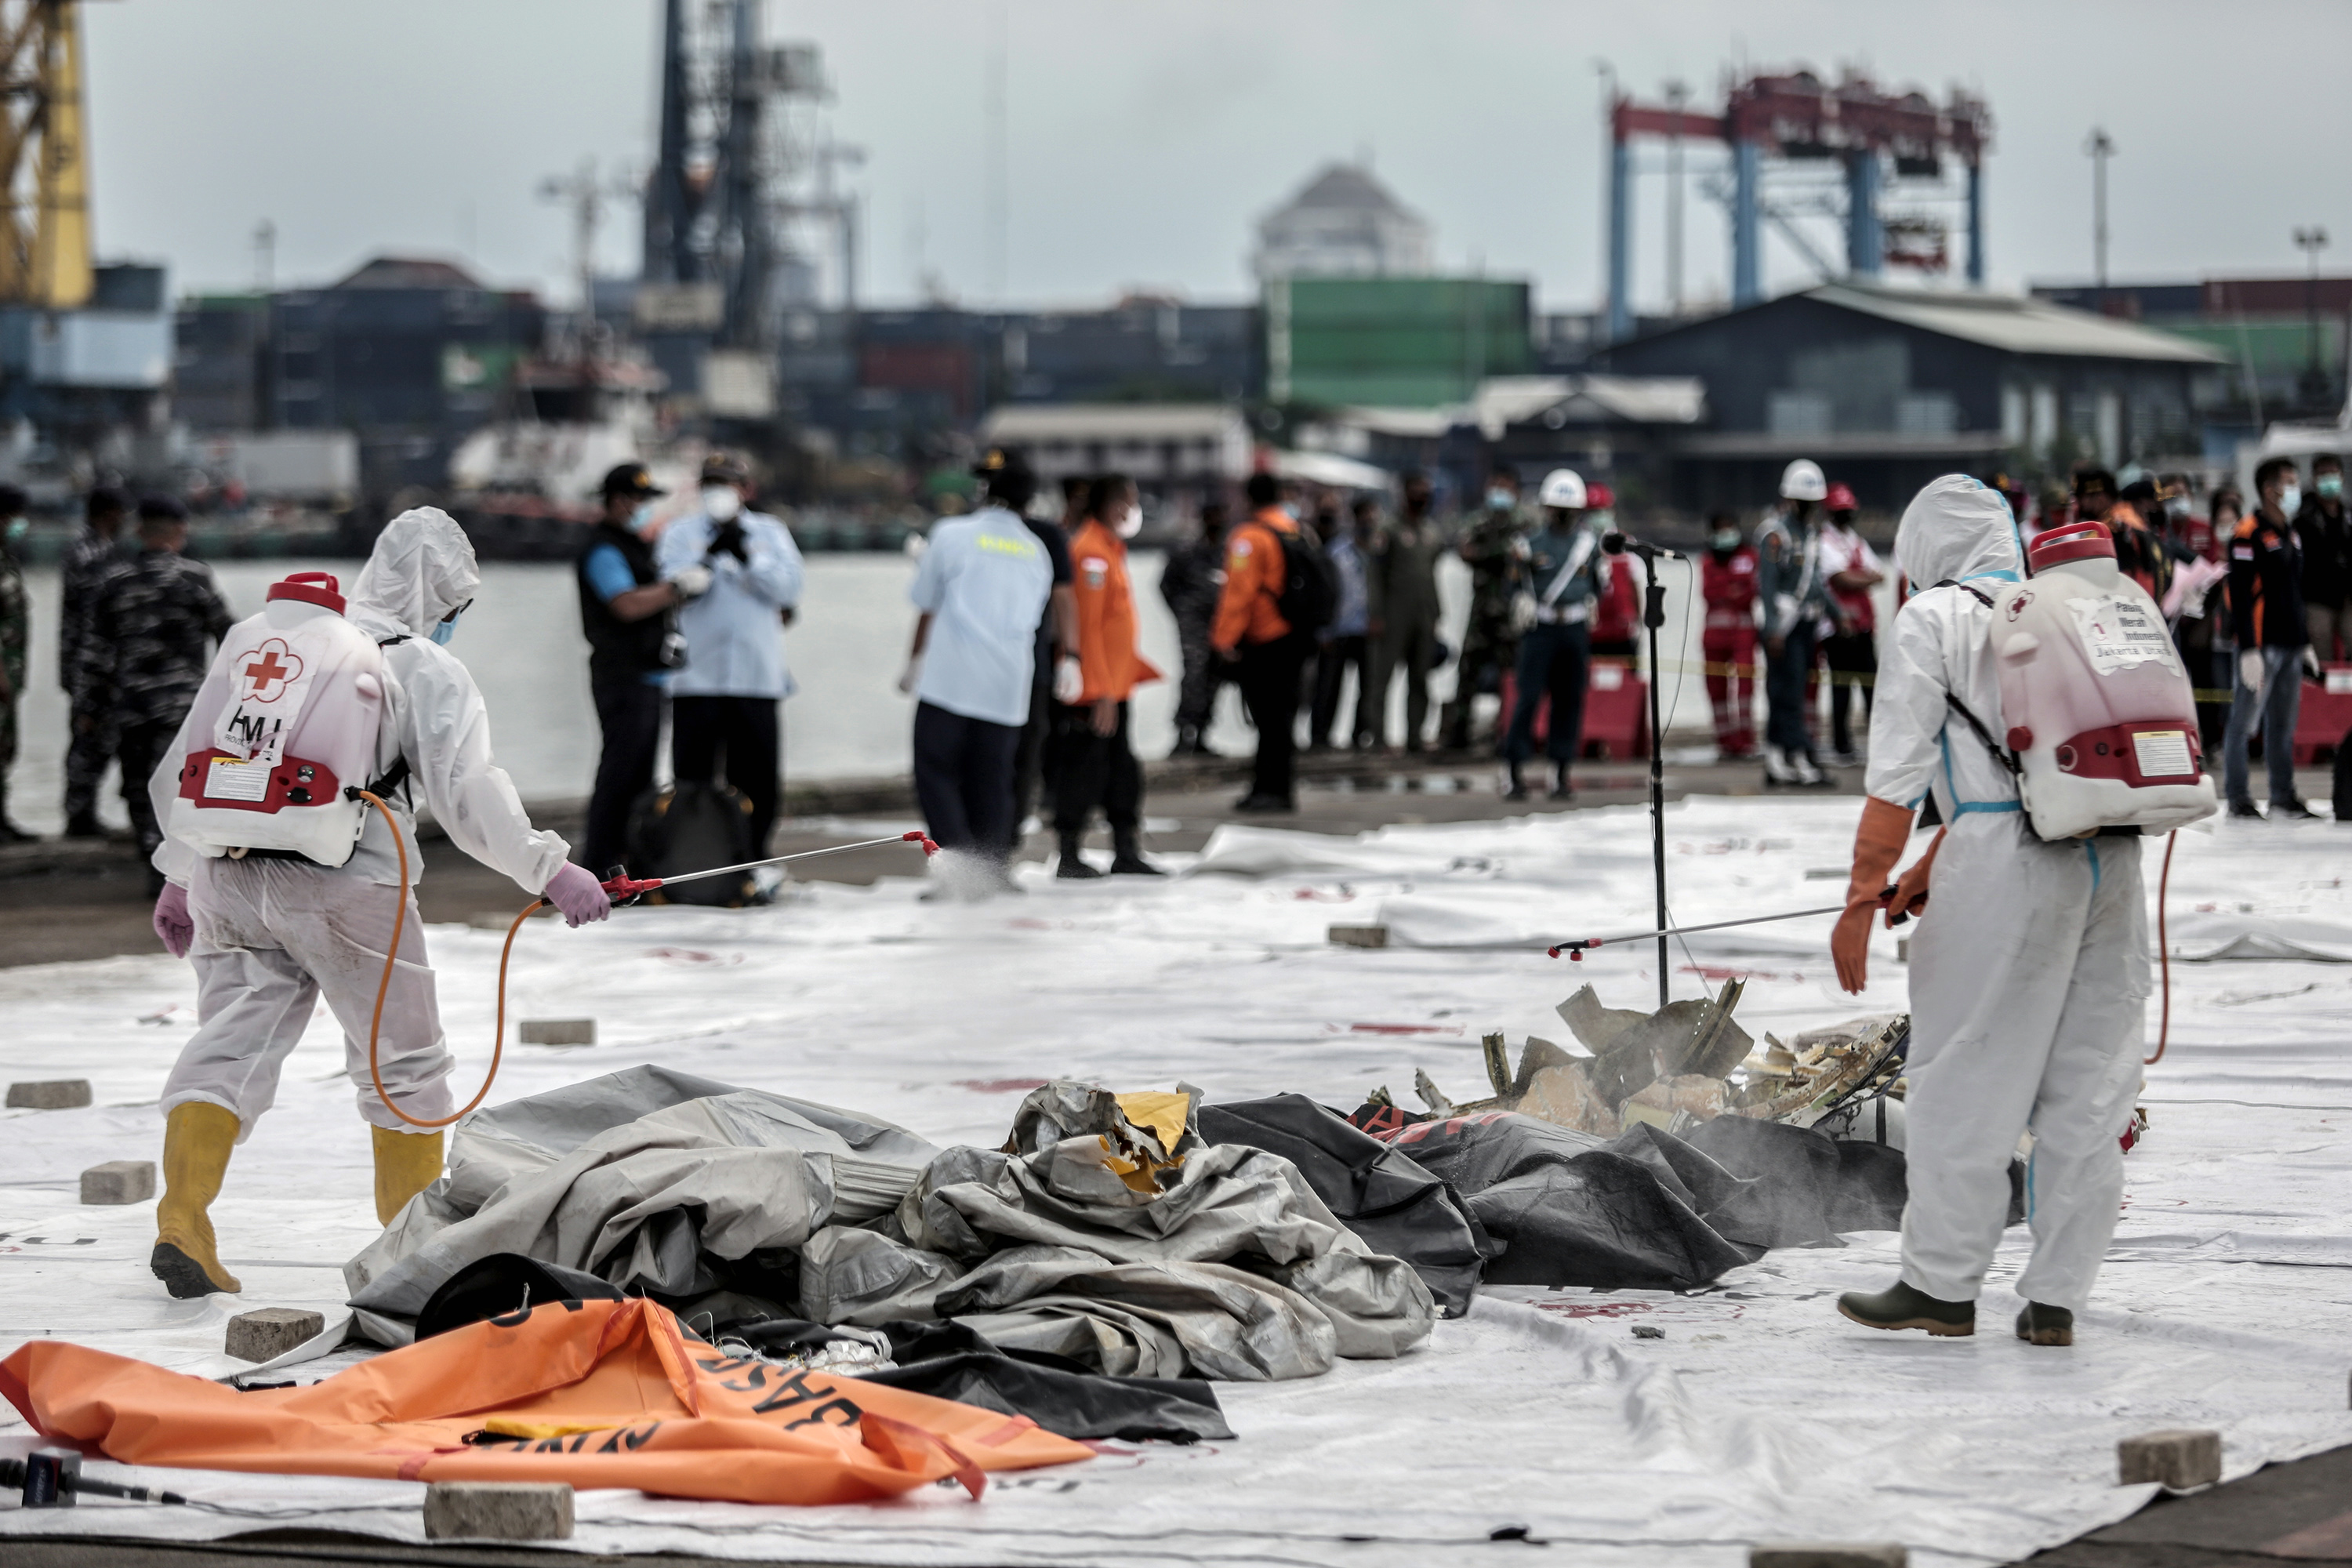 Health workers spray disinfectant over body bags. (AFP PHOTO BY ADITYA AJI)